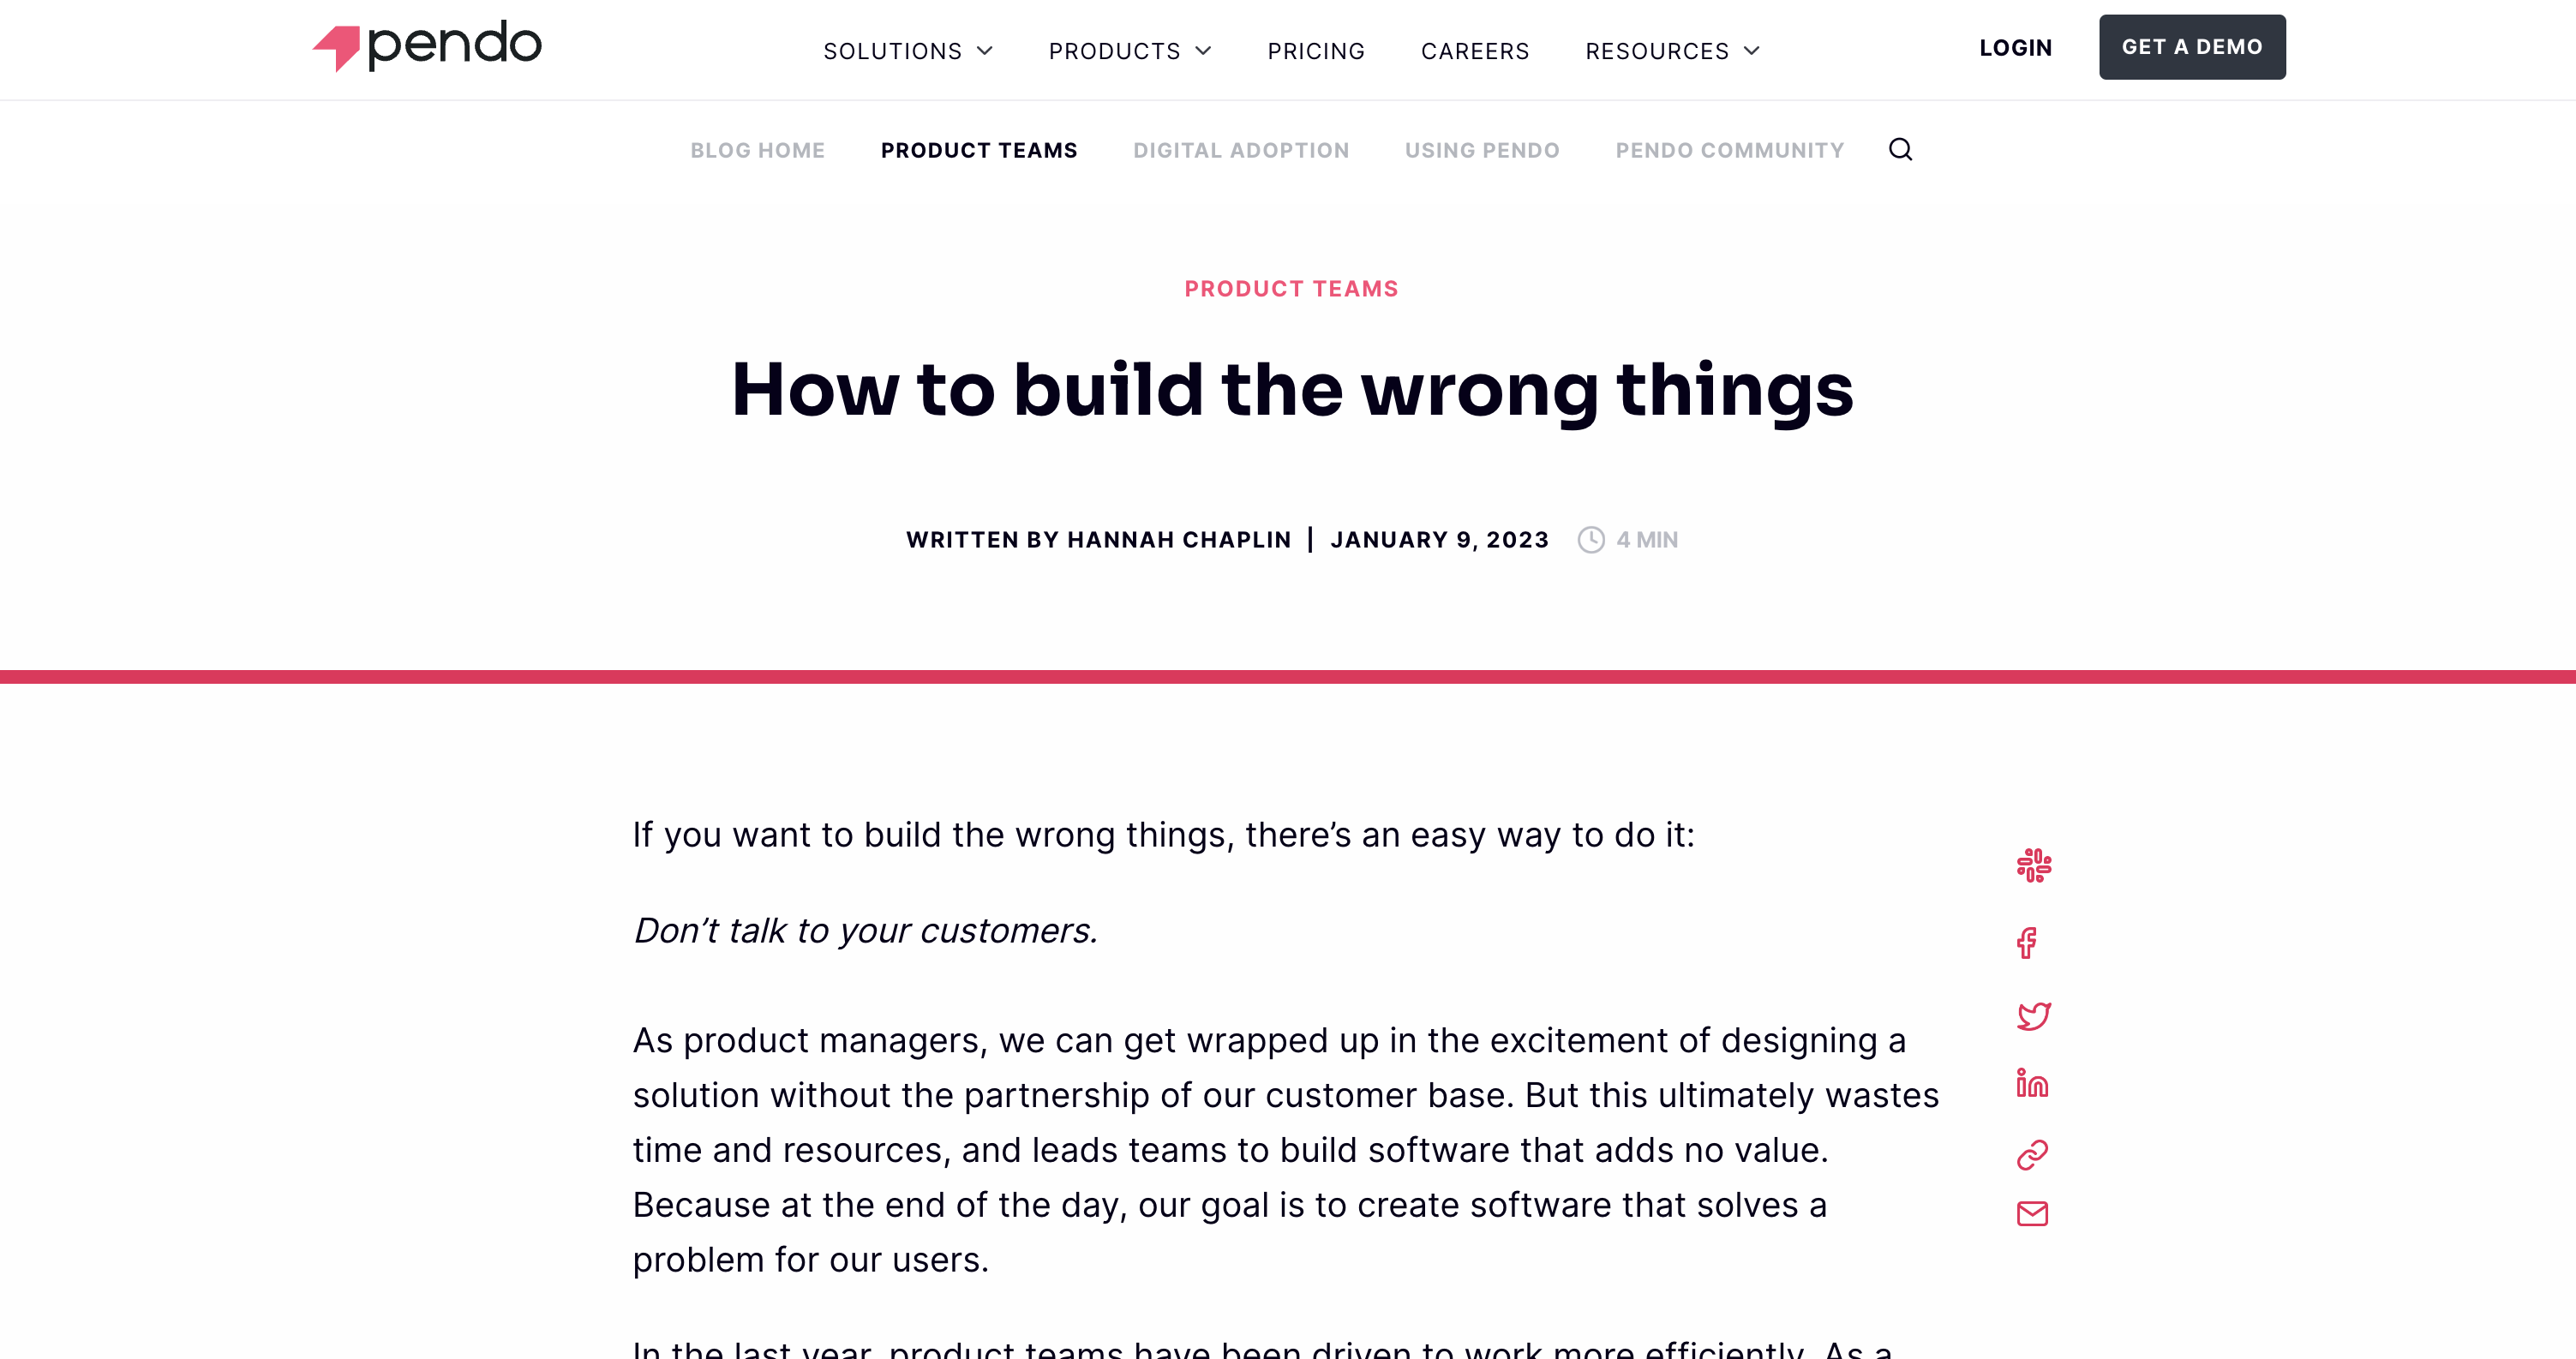 How to build the wrong things